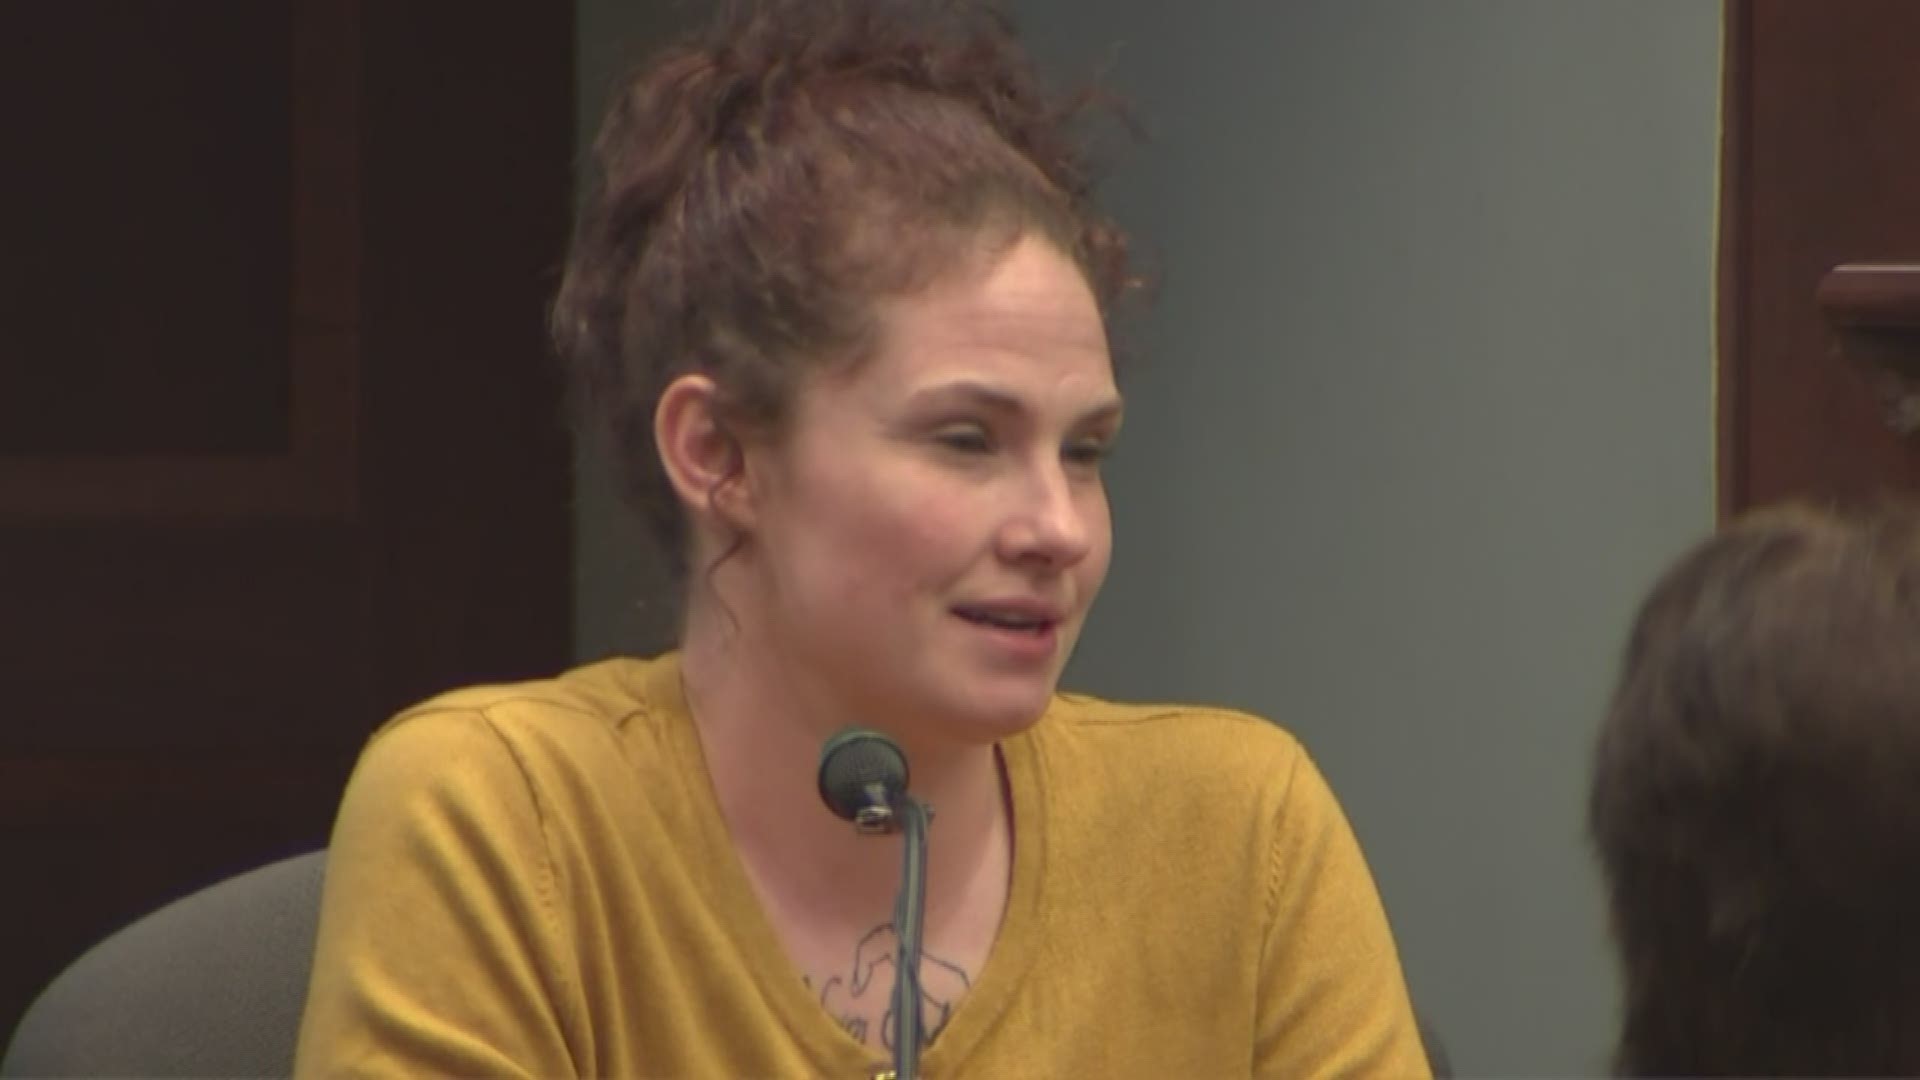 The mother of 2-year-old Laila Daniel testifies on July 11, 2019 in the trial of the foster parents charged in the child's death.